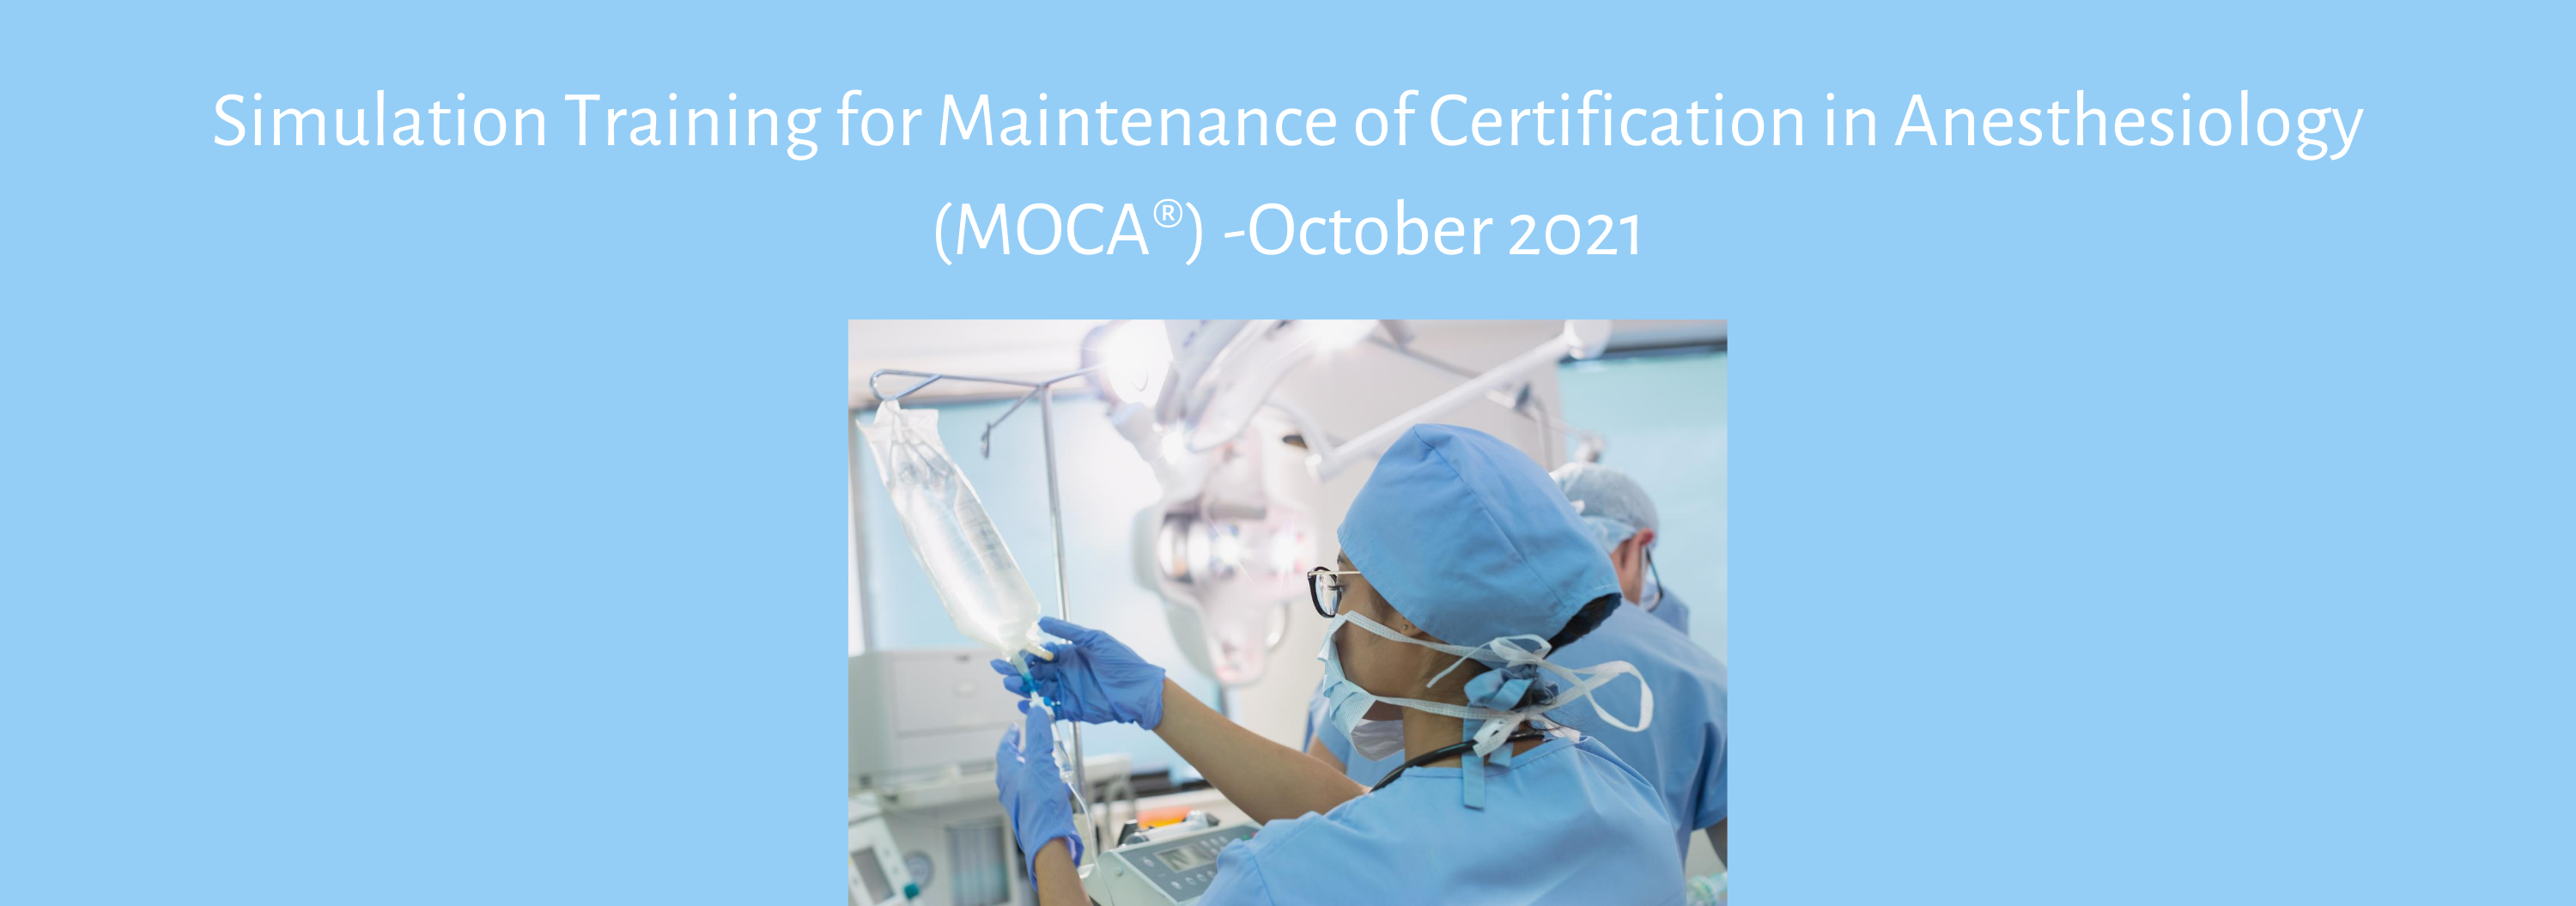 Simulation Training for Maintenance of Certification in Anesthesiology (MOCA) - October 2021 Banner